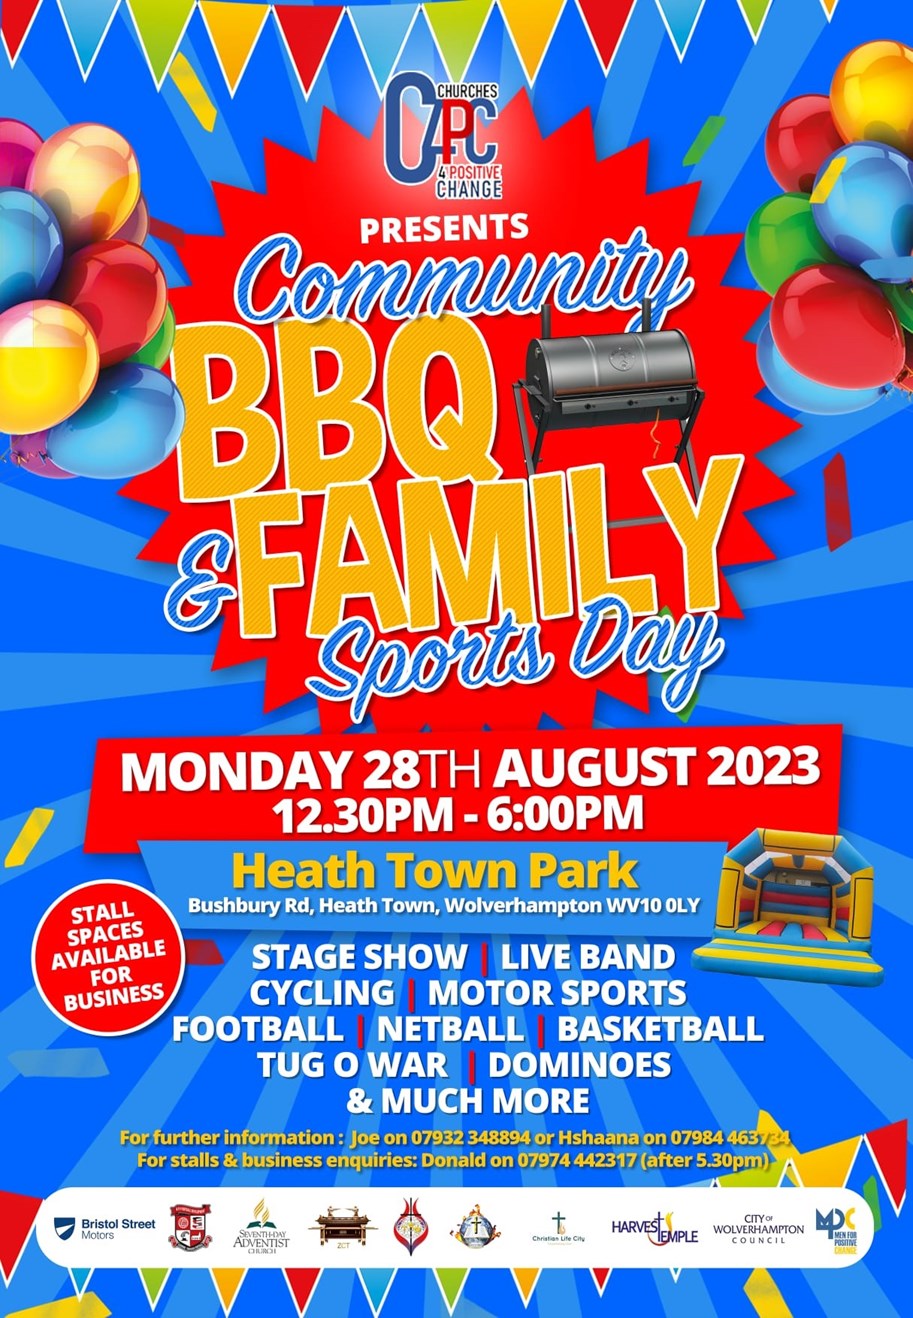 Community BBQ and Family Sports Day, Monday 28 August 2023, 12:30pm - 6:00pm, Heath Town Park, Bushbury Road, Heath Town, Wolverhampton, WV10 0LY. Stage show, live band, cycling, motor sports, football, netball, basketball, tug o war, dominoes and much more.